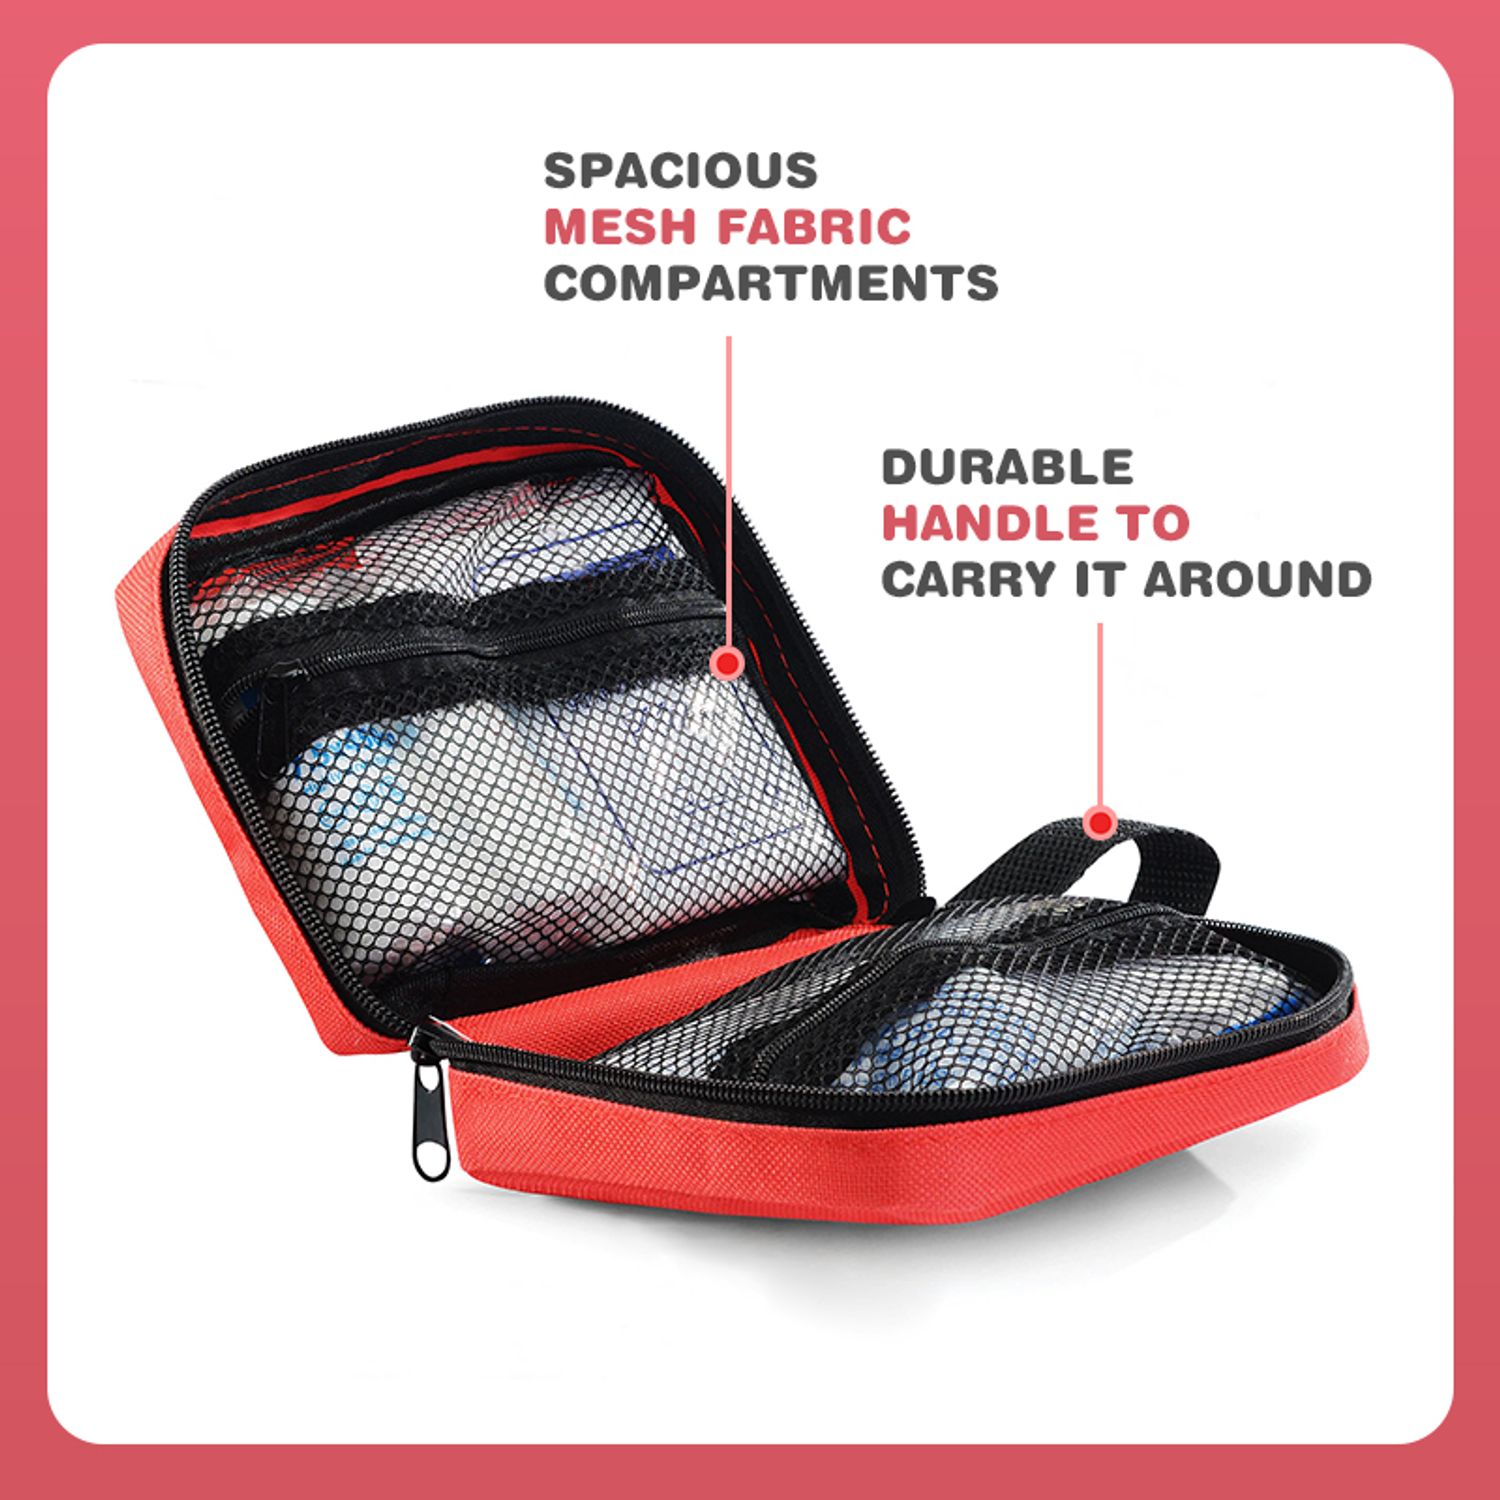 Interior view of a children's cute first aid pouch showing spacious mesh compartments and items neatly organized for easy accessibility
